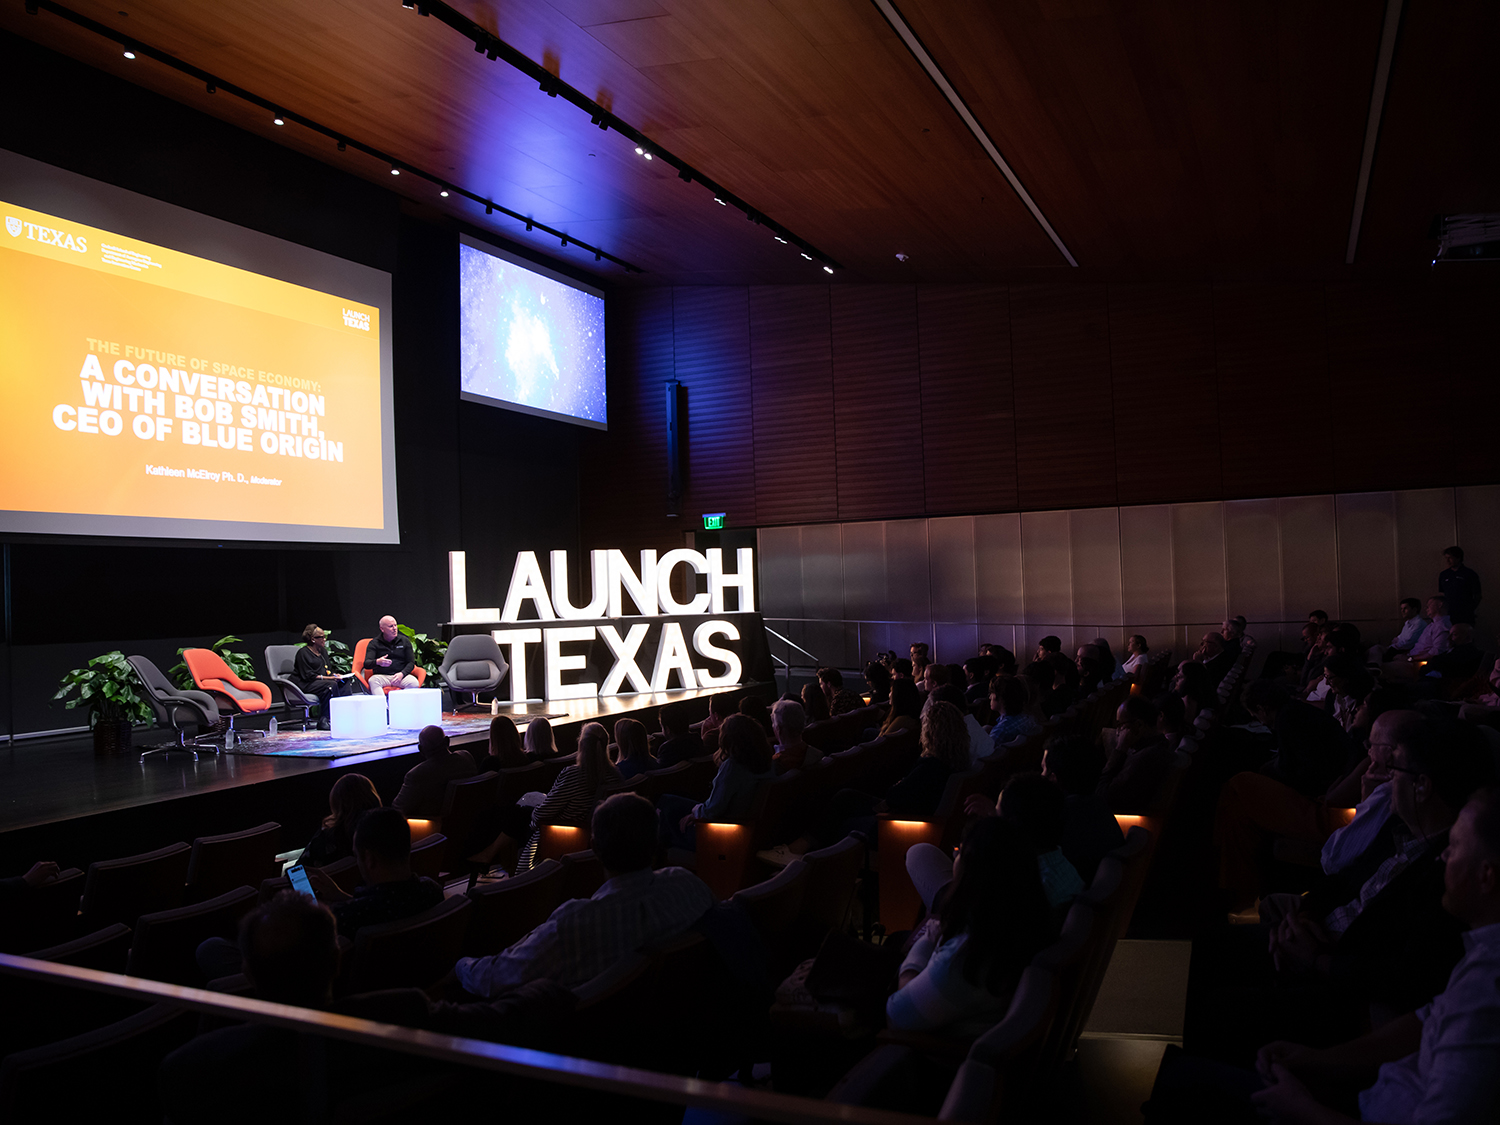 Bob Smith's presentation at the Launch Texas event with a full auditorium